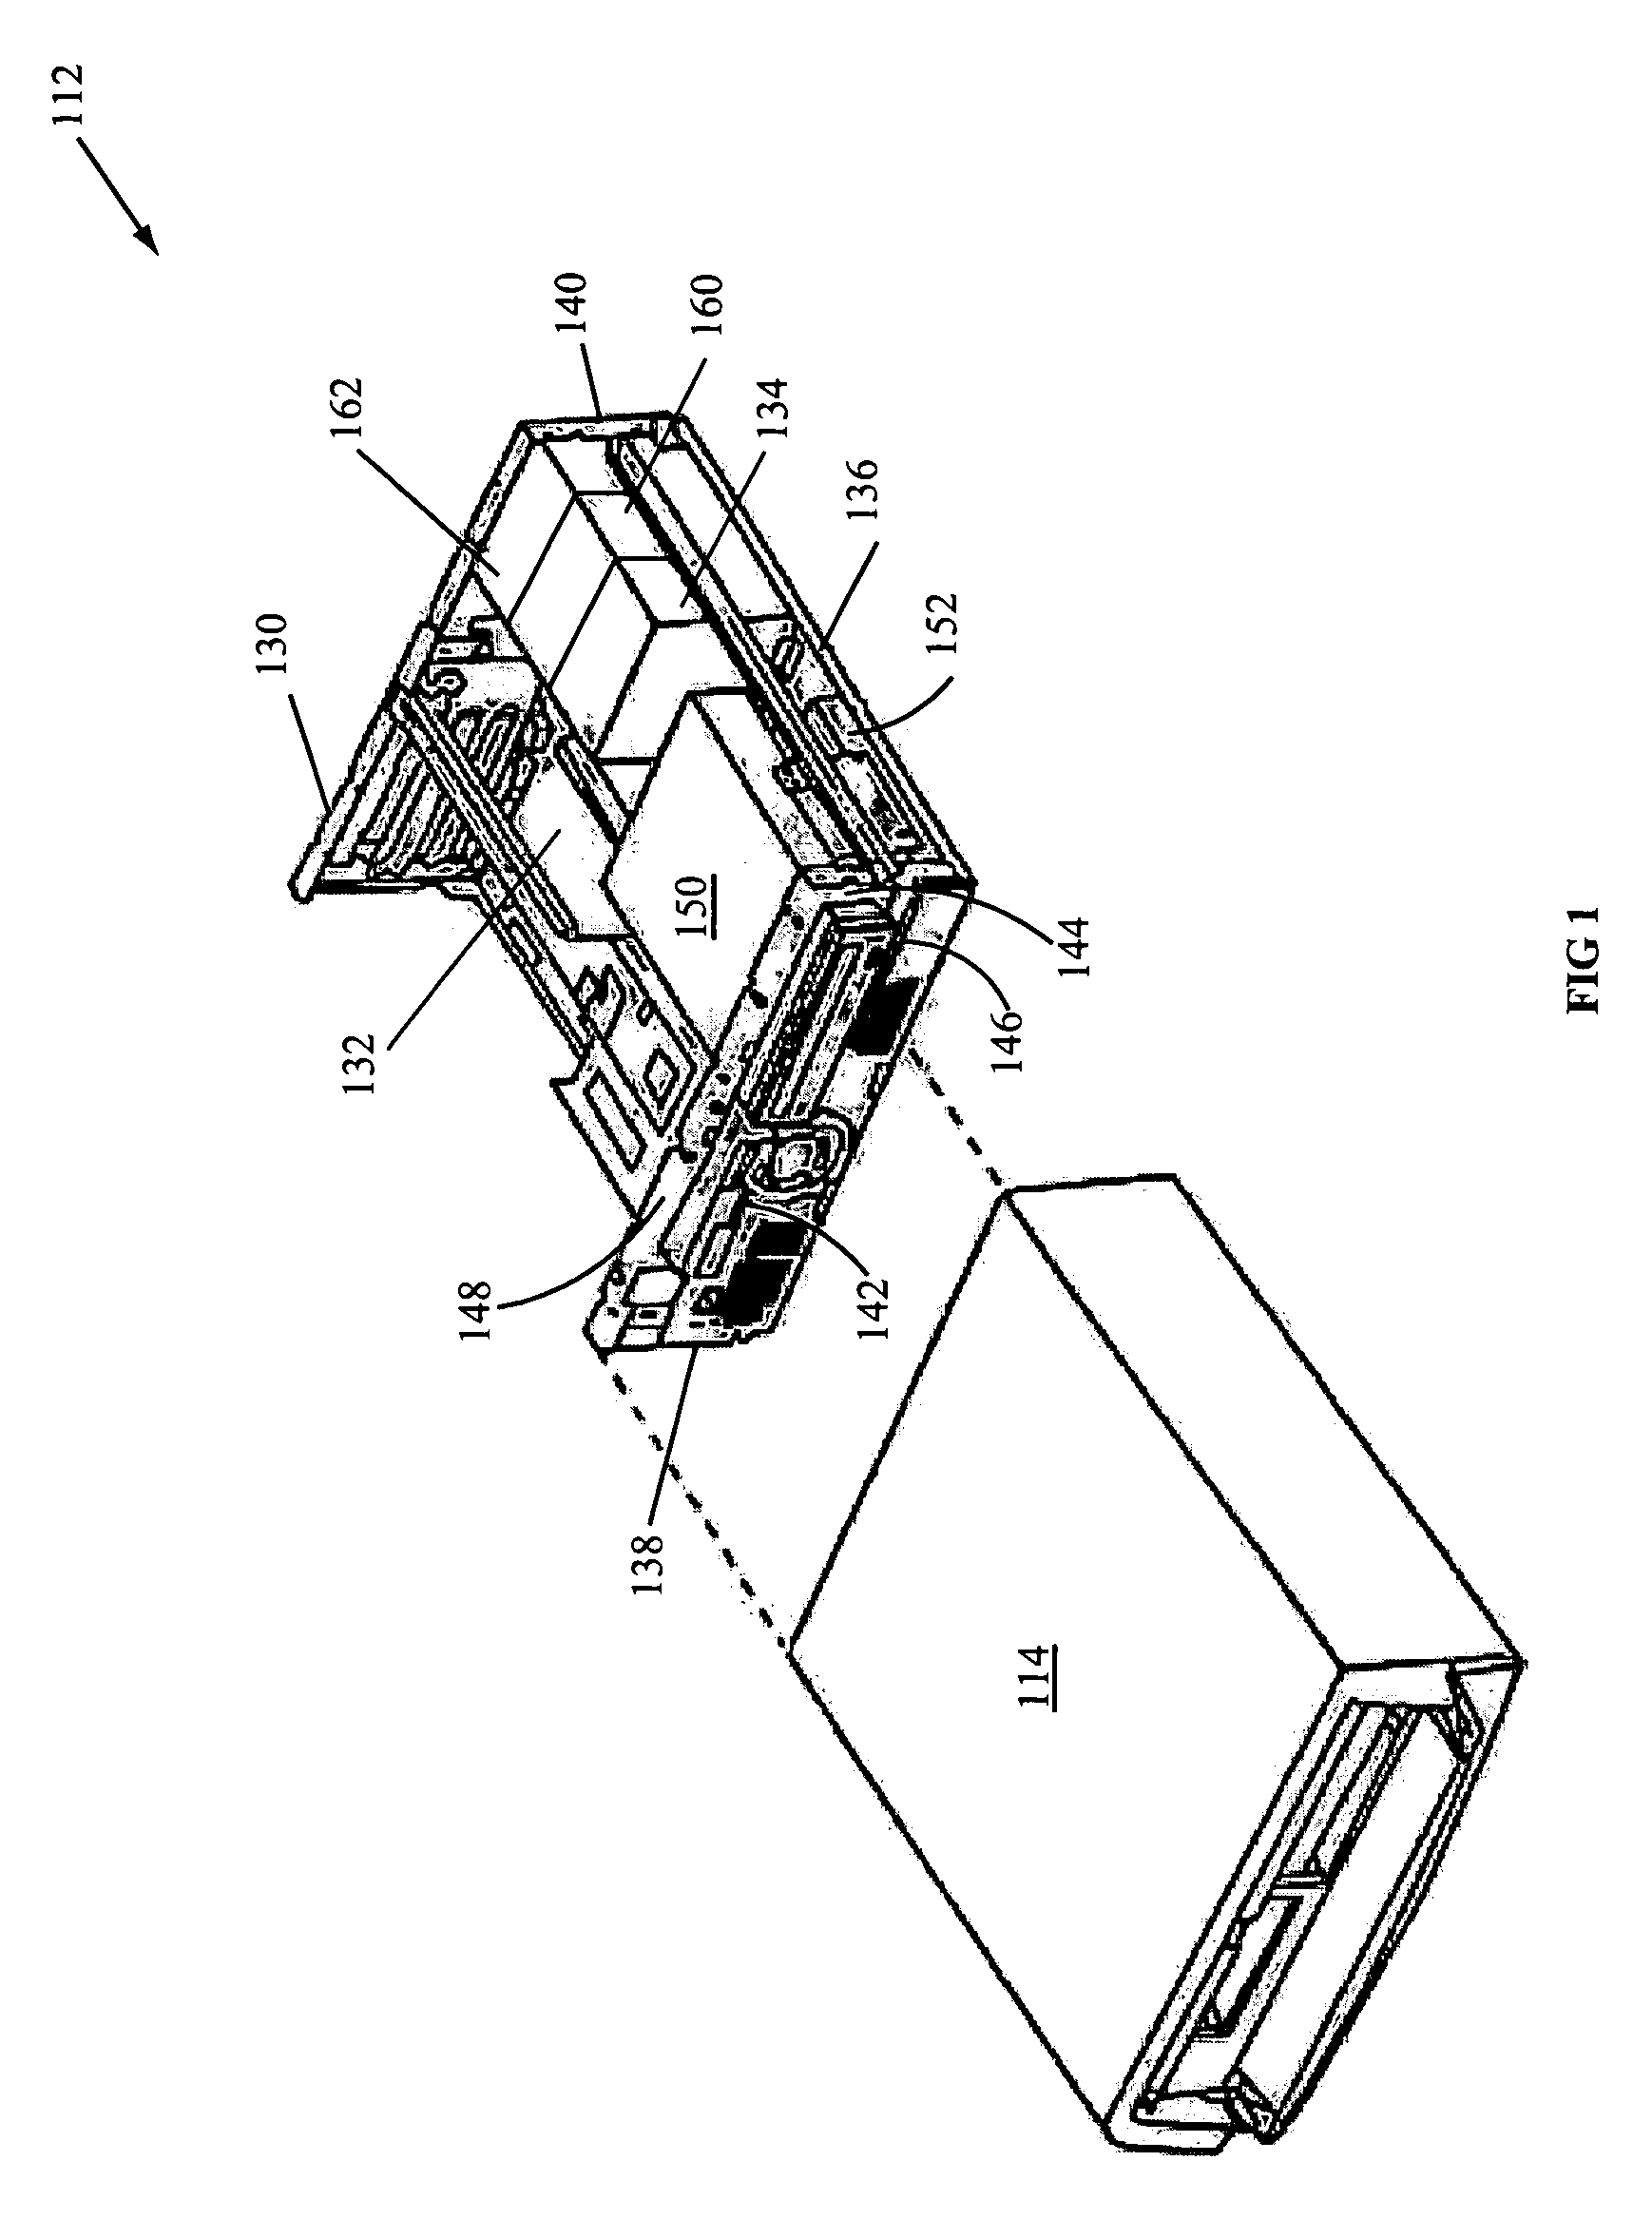 Systems, apparatus and method for reducing dust on components in a computer system